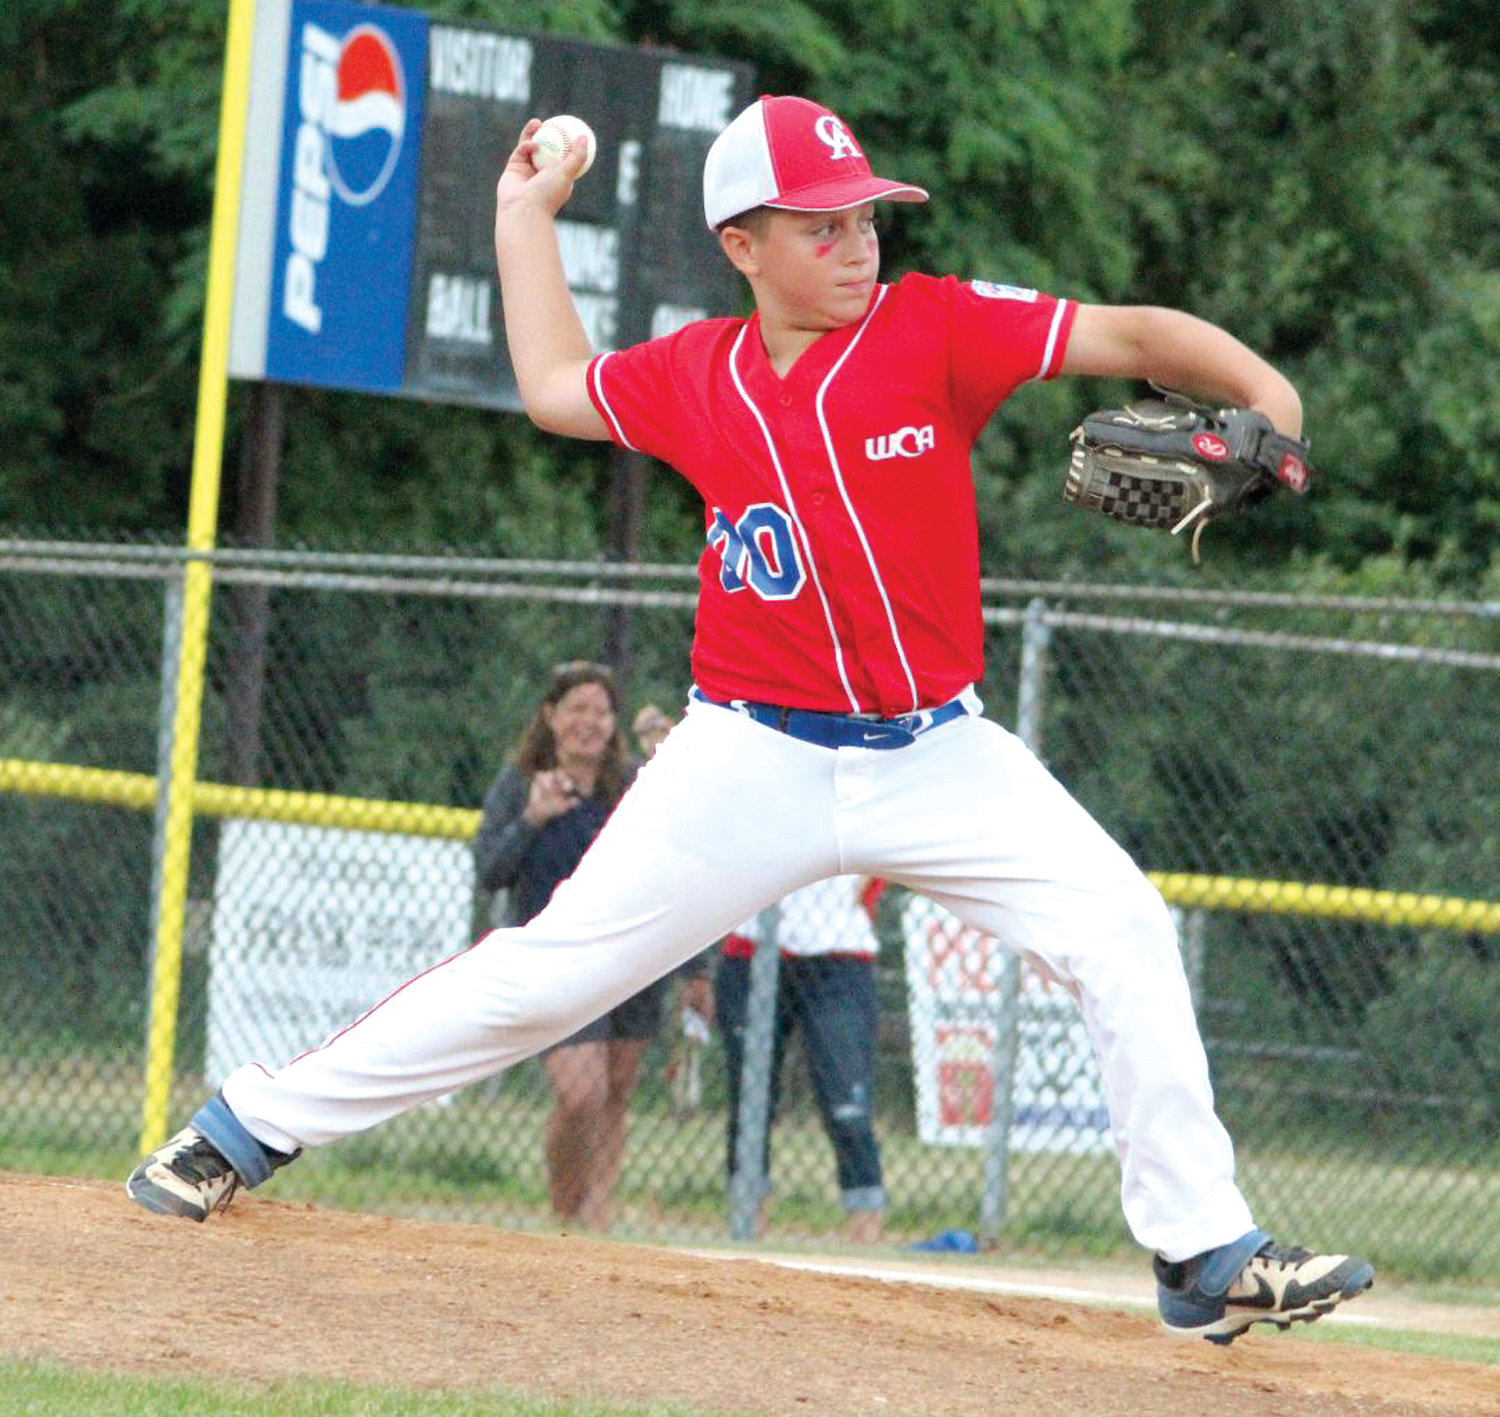 ON THE HILL: WCA pitcher Anthony Burt deals against NK last week.